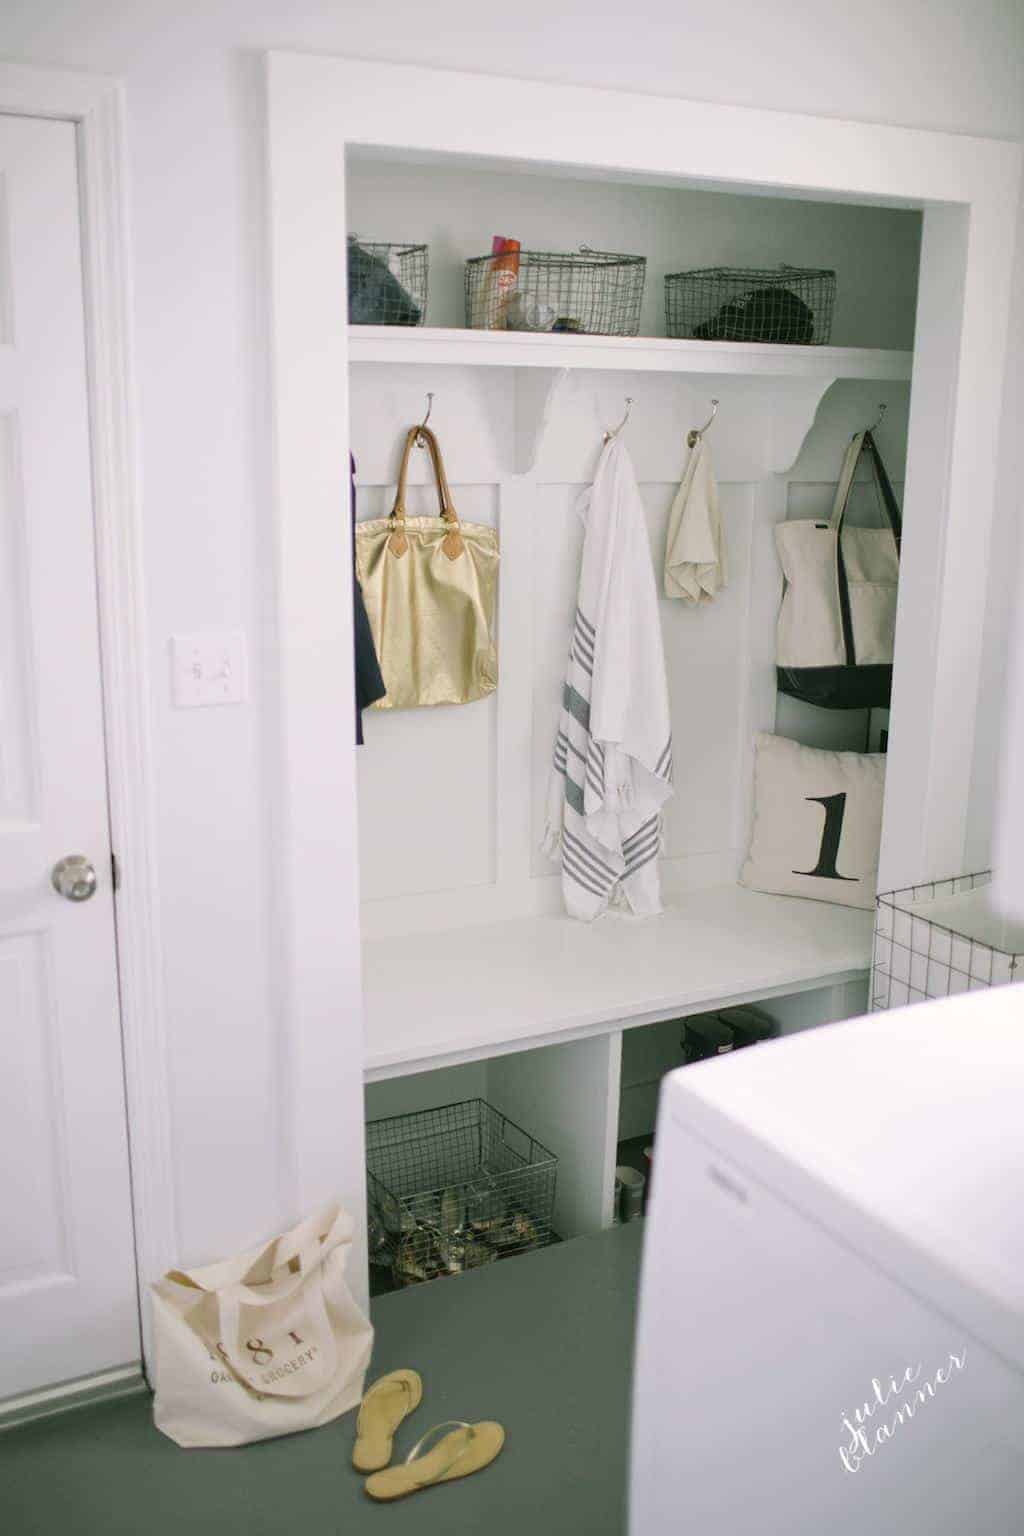 A look into a mudroom with baskets and coats hanging from farmhouse hooks.